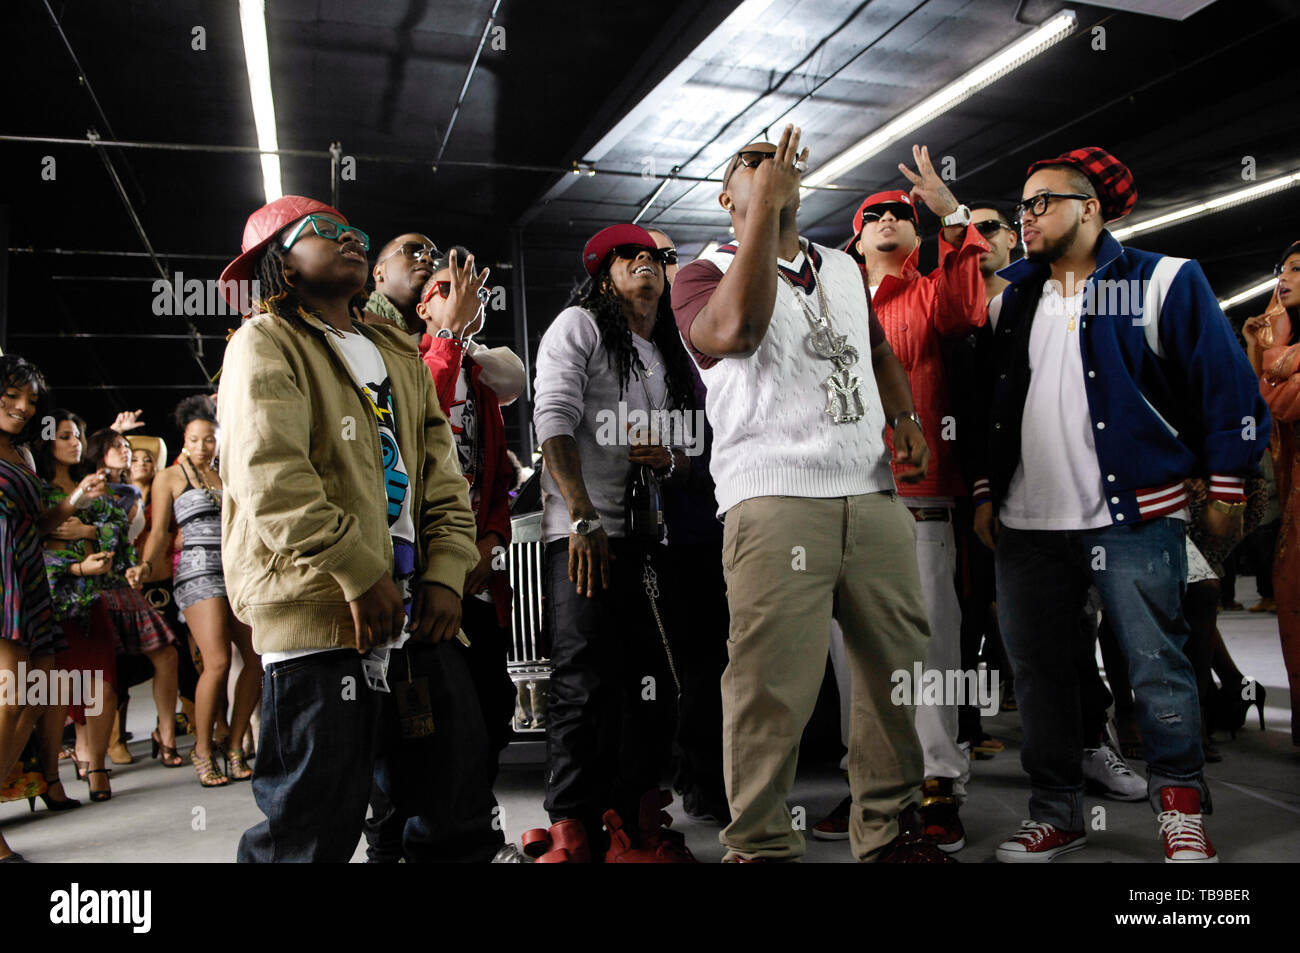 (L-R) Lil Chuckee, Rap Superstar Lil Wayne, Mack Maine and guest on the set of their music video with Young Money called 'Every Girl' filmed in Los Angeles, CA on February 14th, 2009. Stock Photo